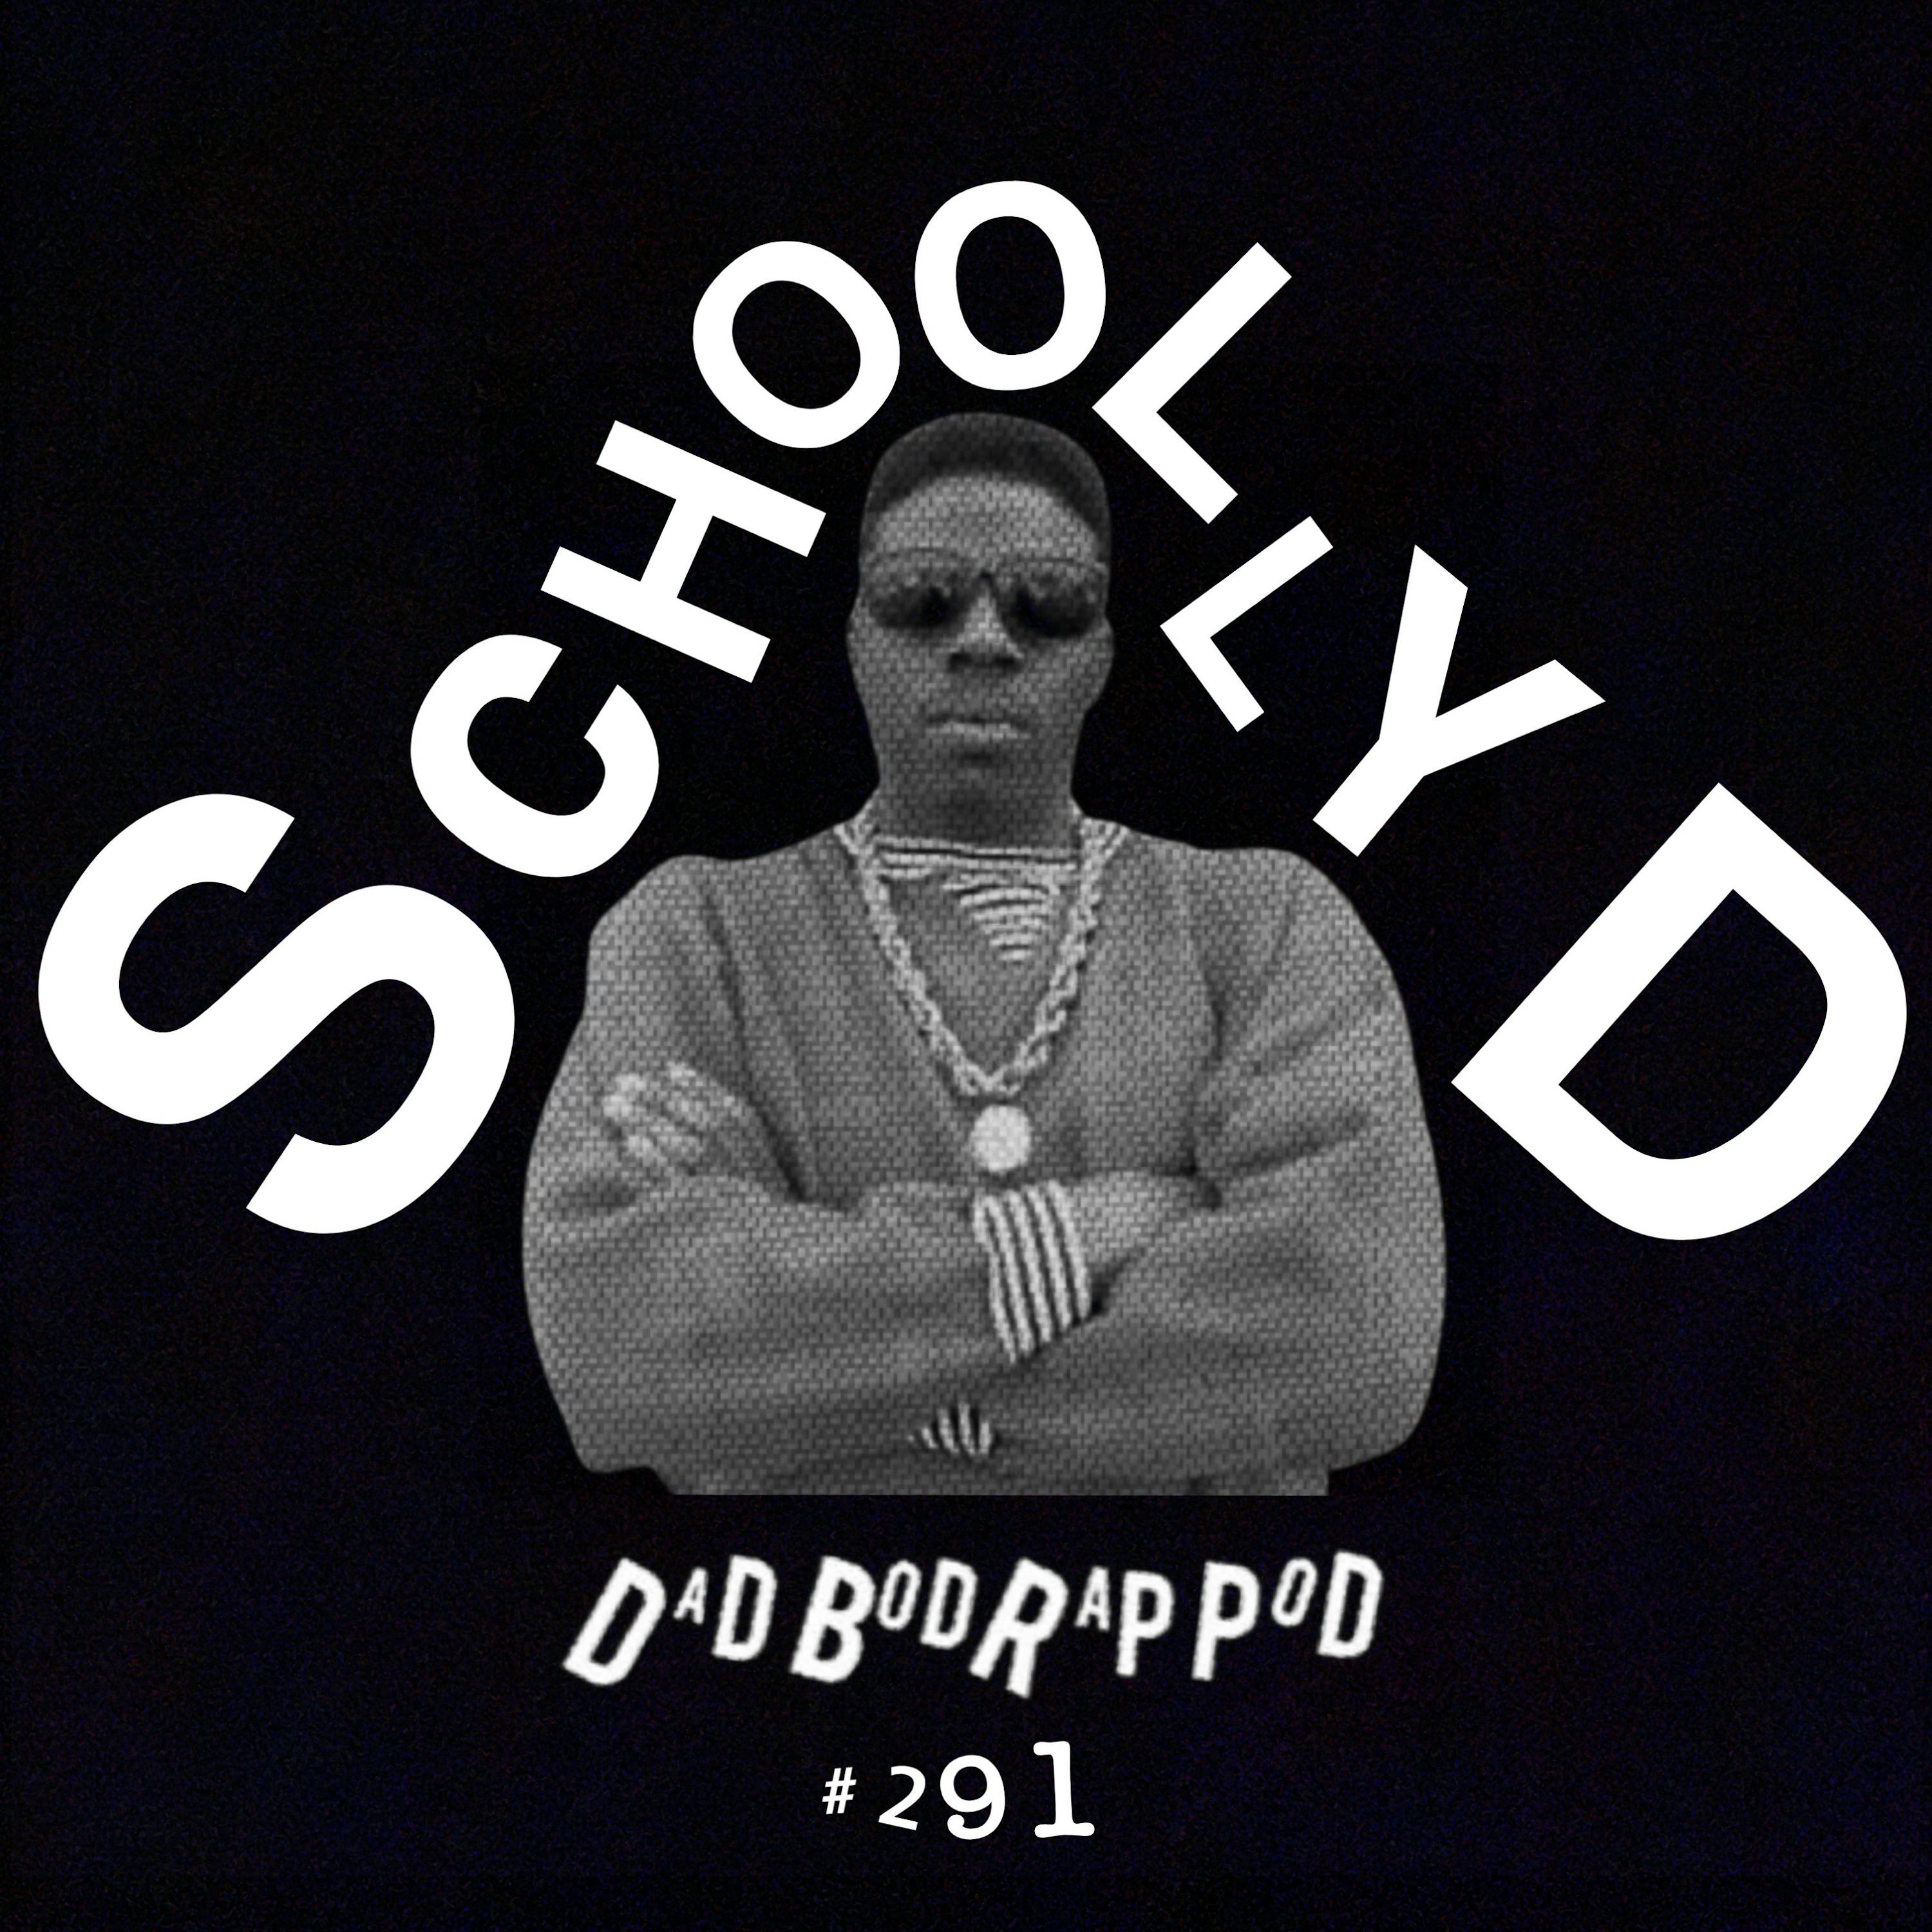 Episode 291- Back To School with guest Schoolly D